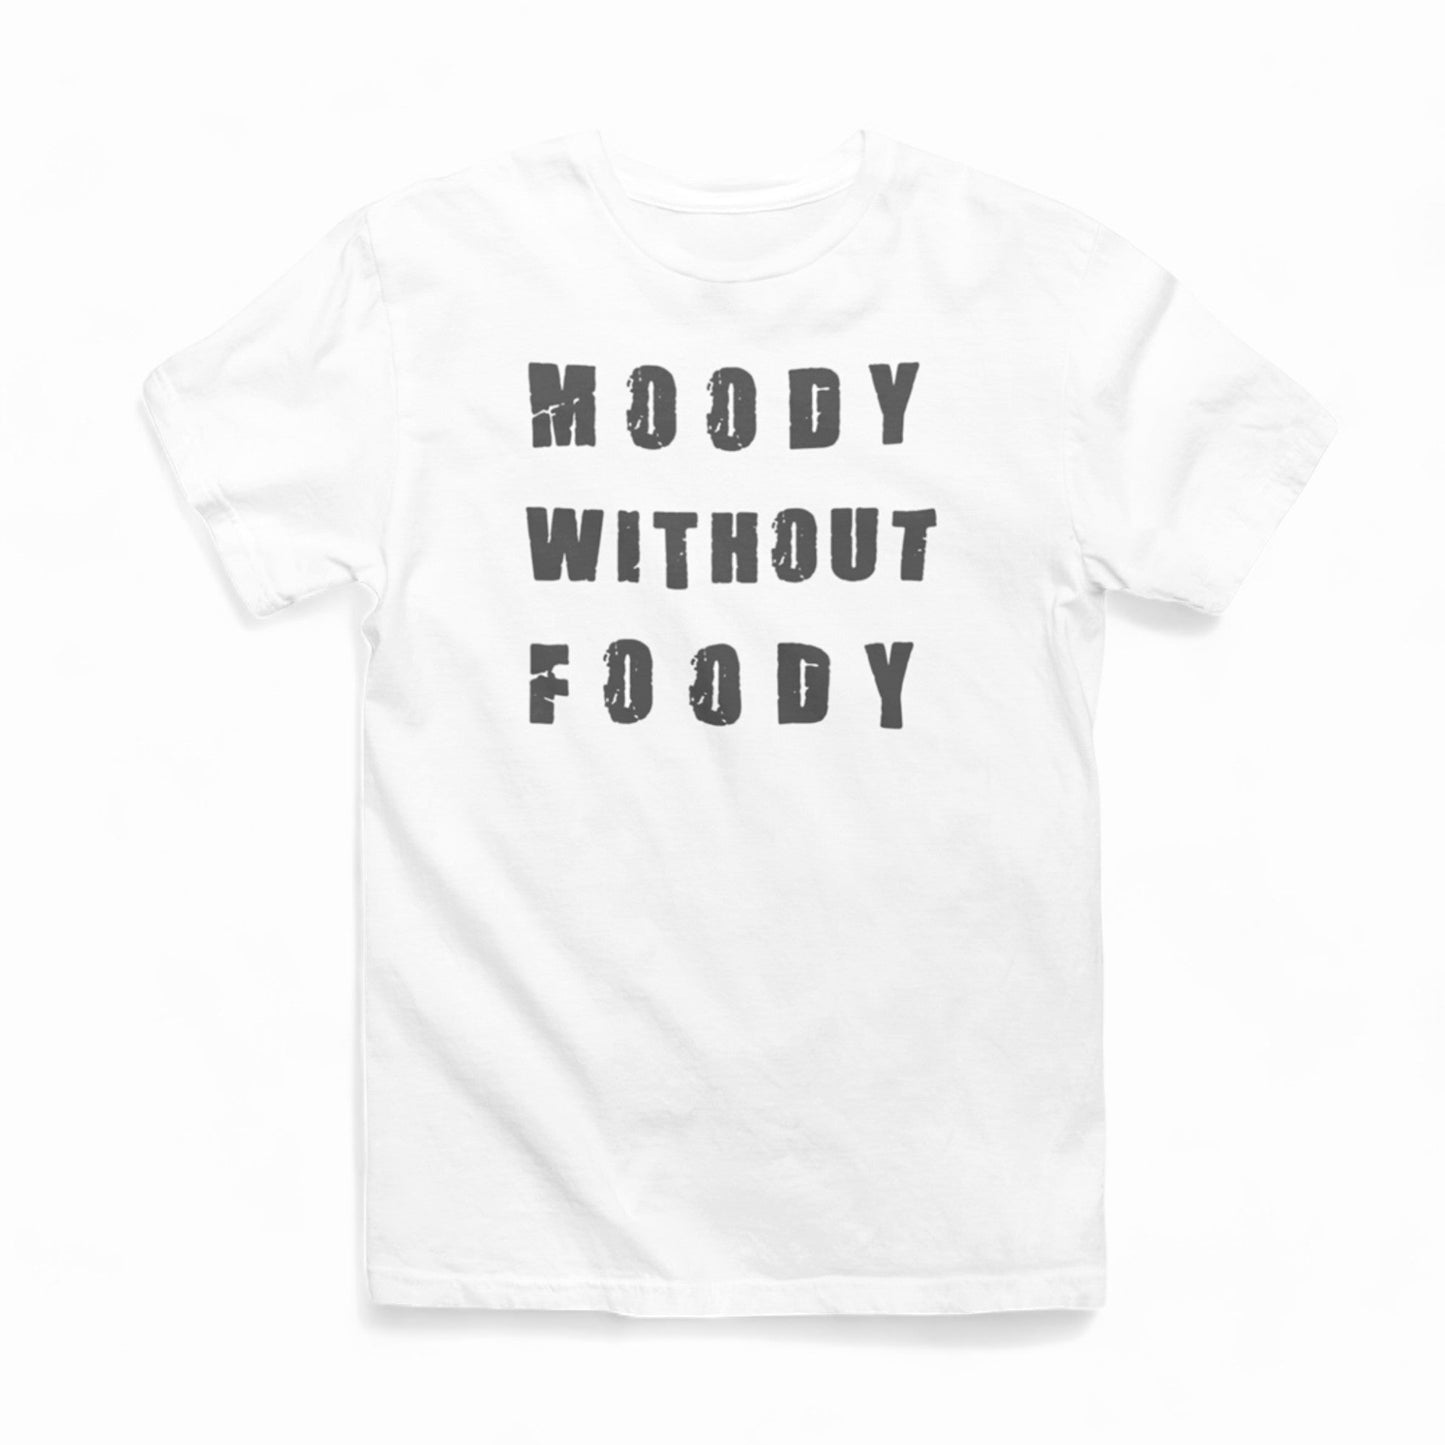 "A white t-shirt laid out on a white background, featuring the phrase 'MOODY WITHOUT FOODY' in large, grey, distressed font. The shirt is unadorned otherwise, with a crew neckline and short sleeves, emphasizing the message as the focal point."